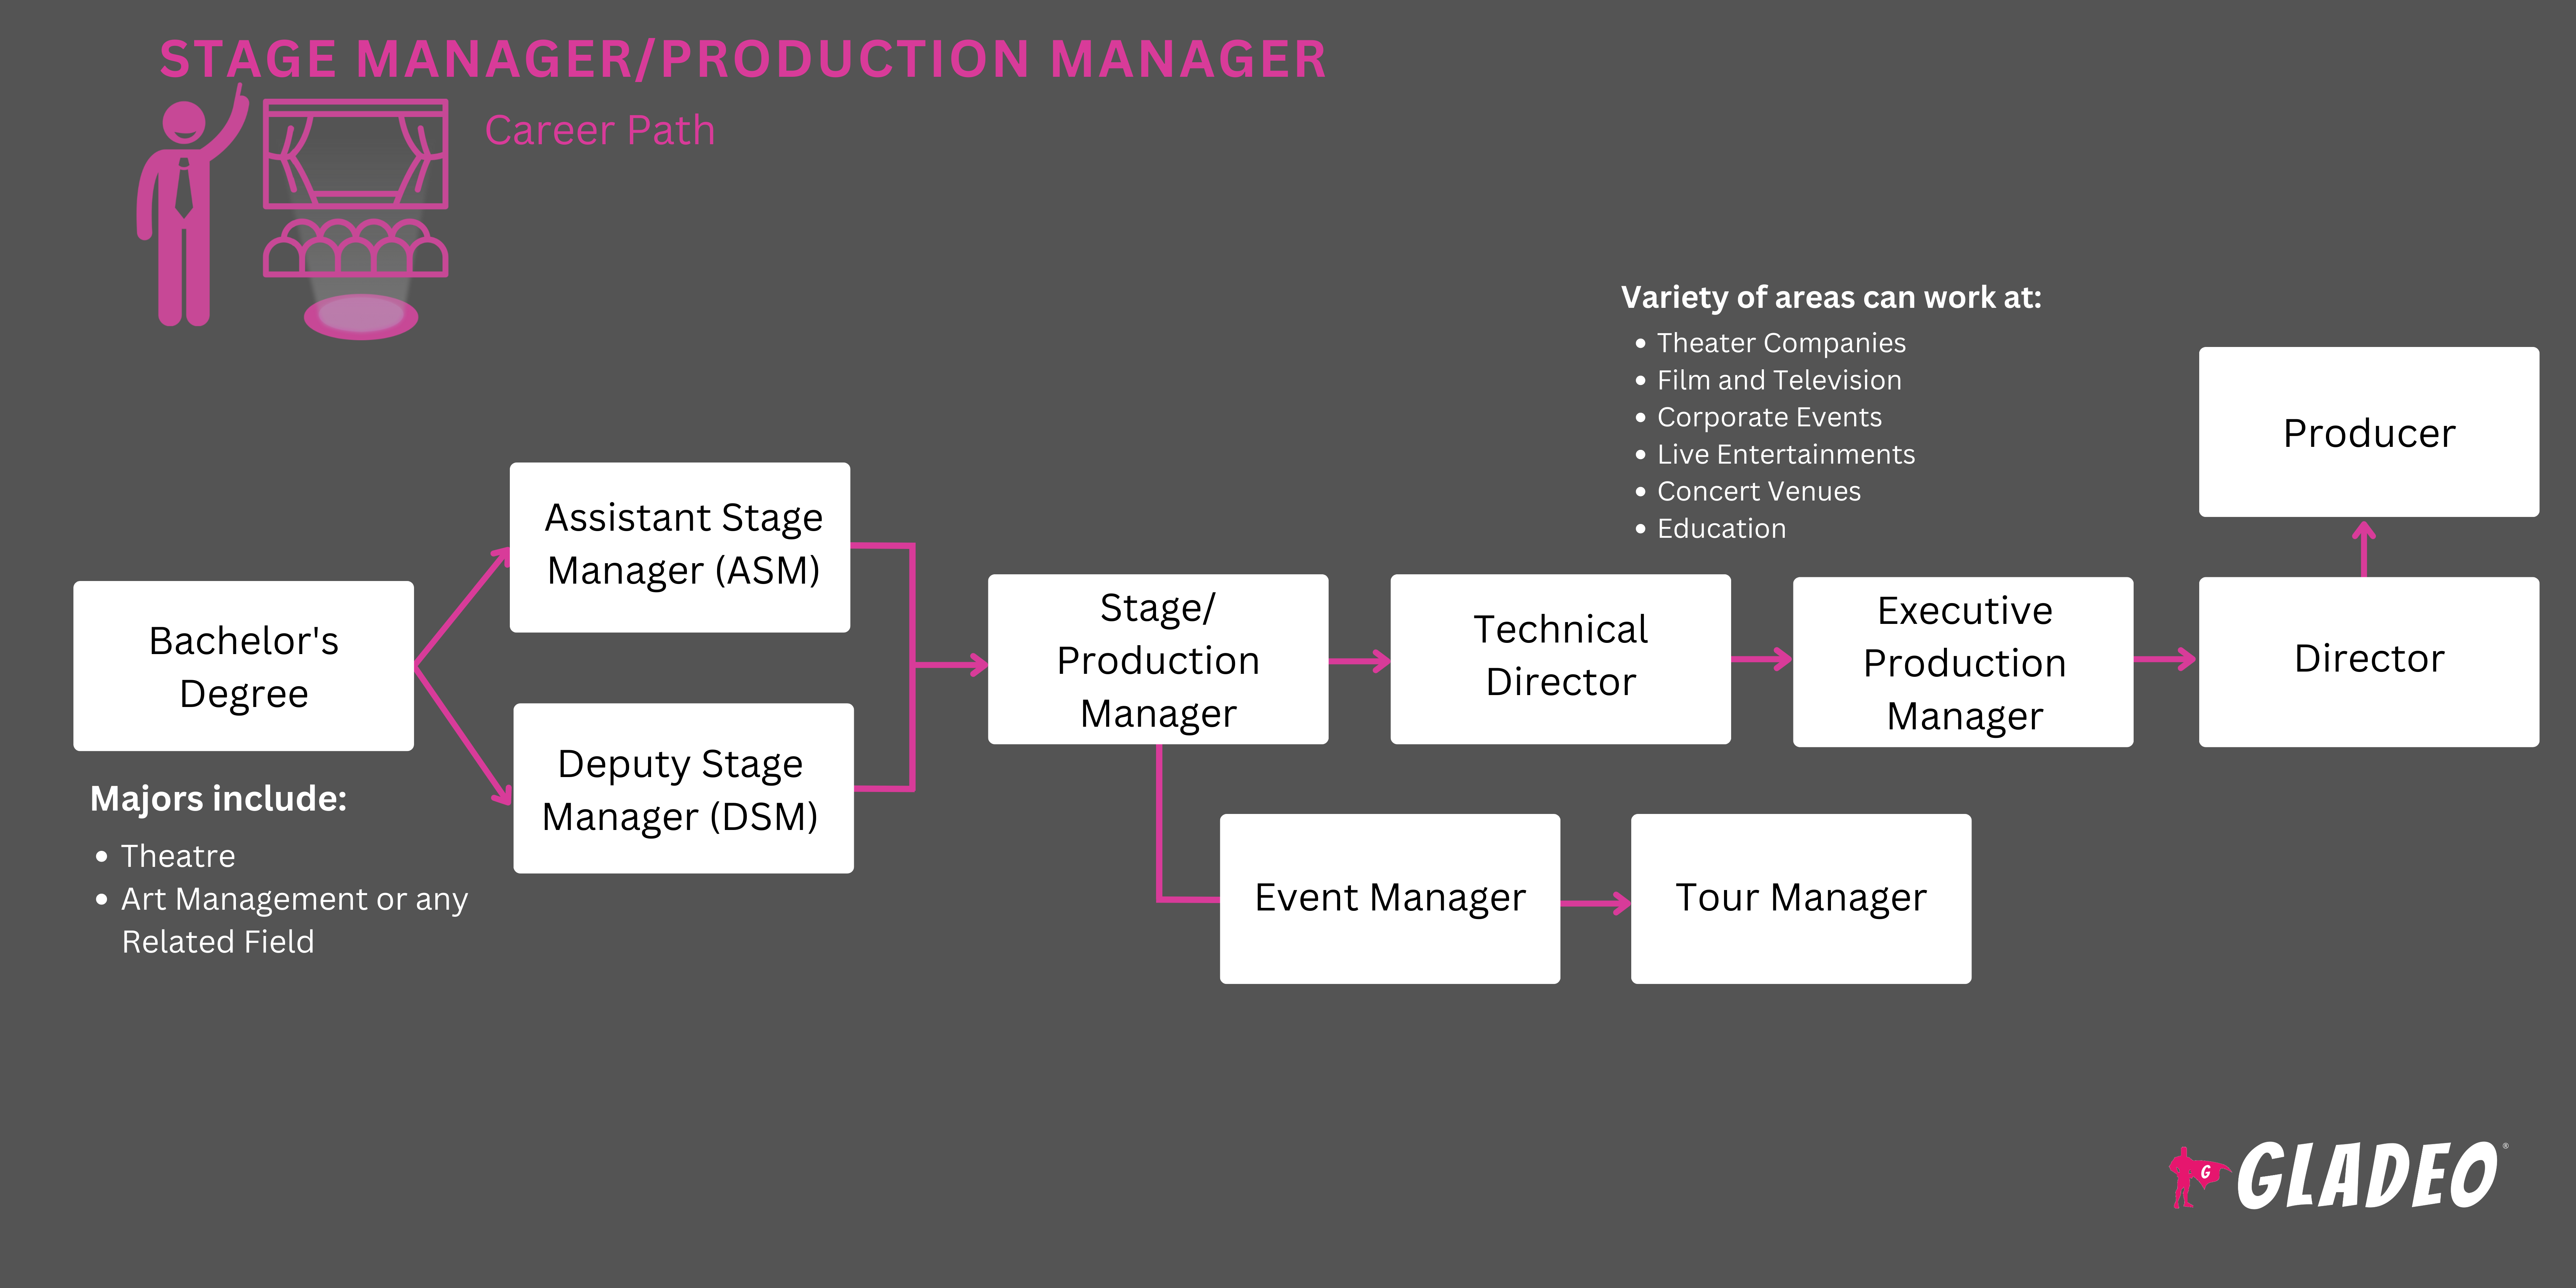 Stage/Production Manager